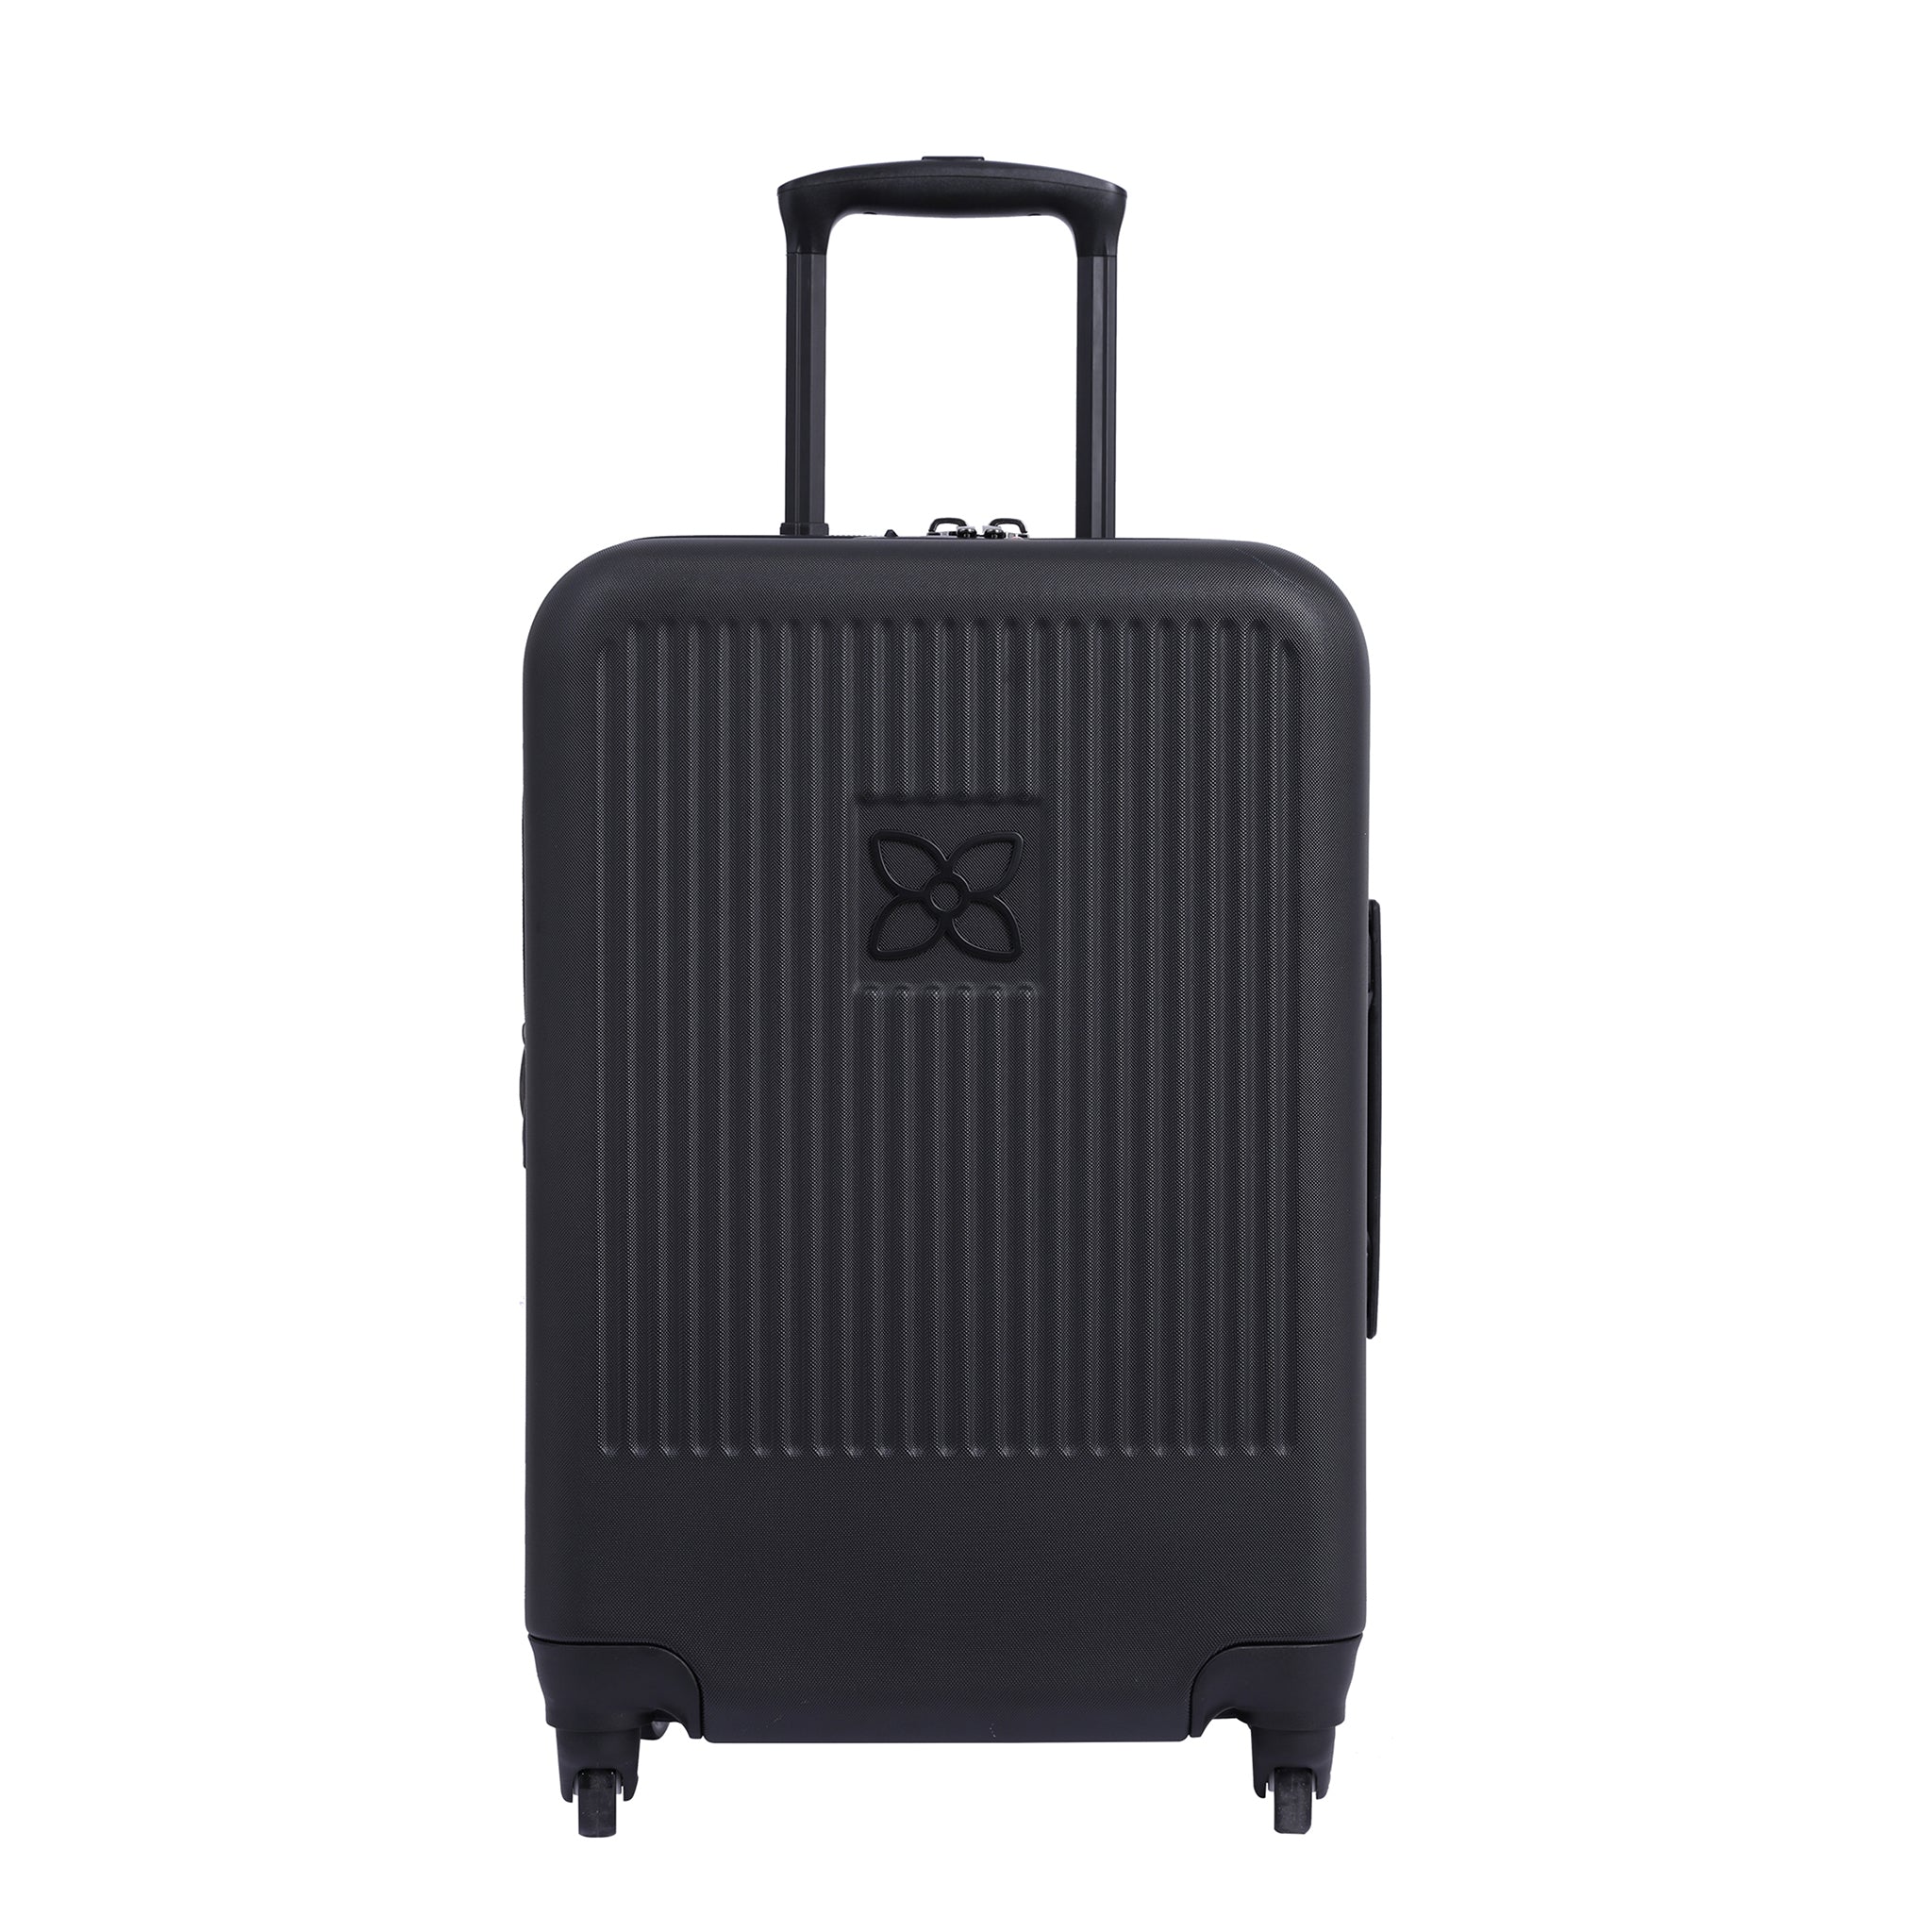 Sherpani hard-shell luggage the Meridian. Part of Sherpani Travel Carry-on Bundle in Classic Black.